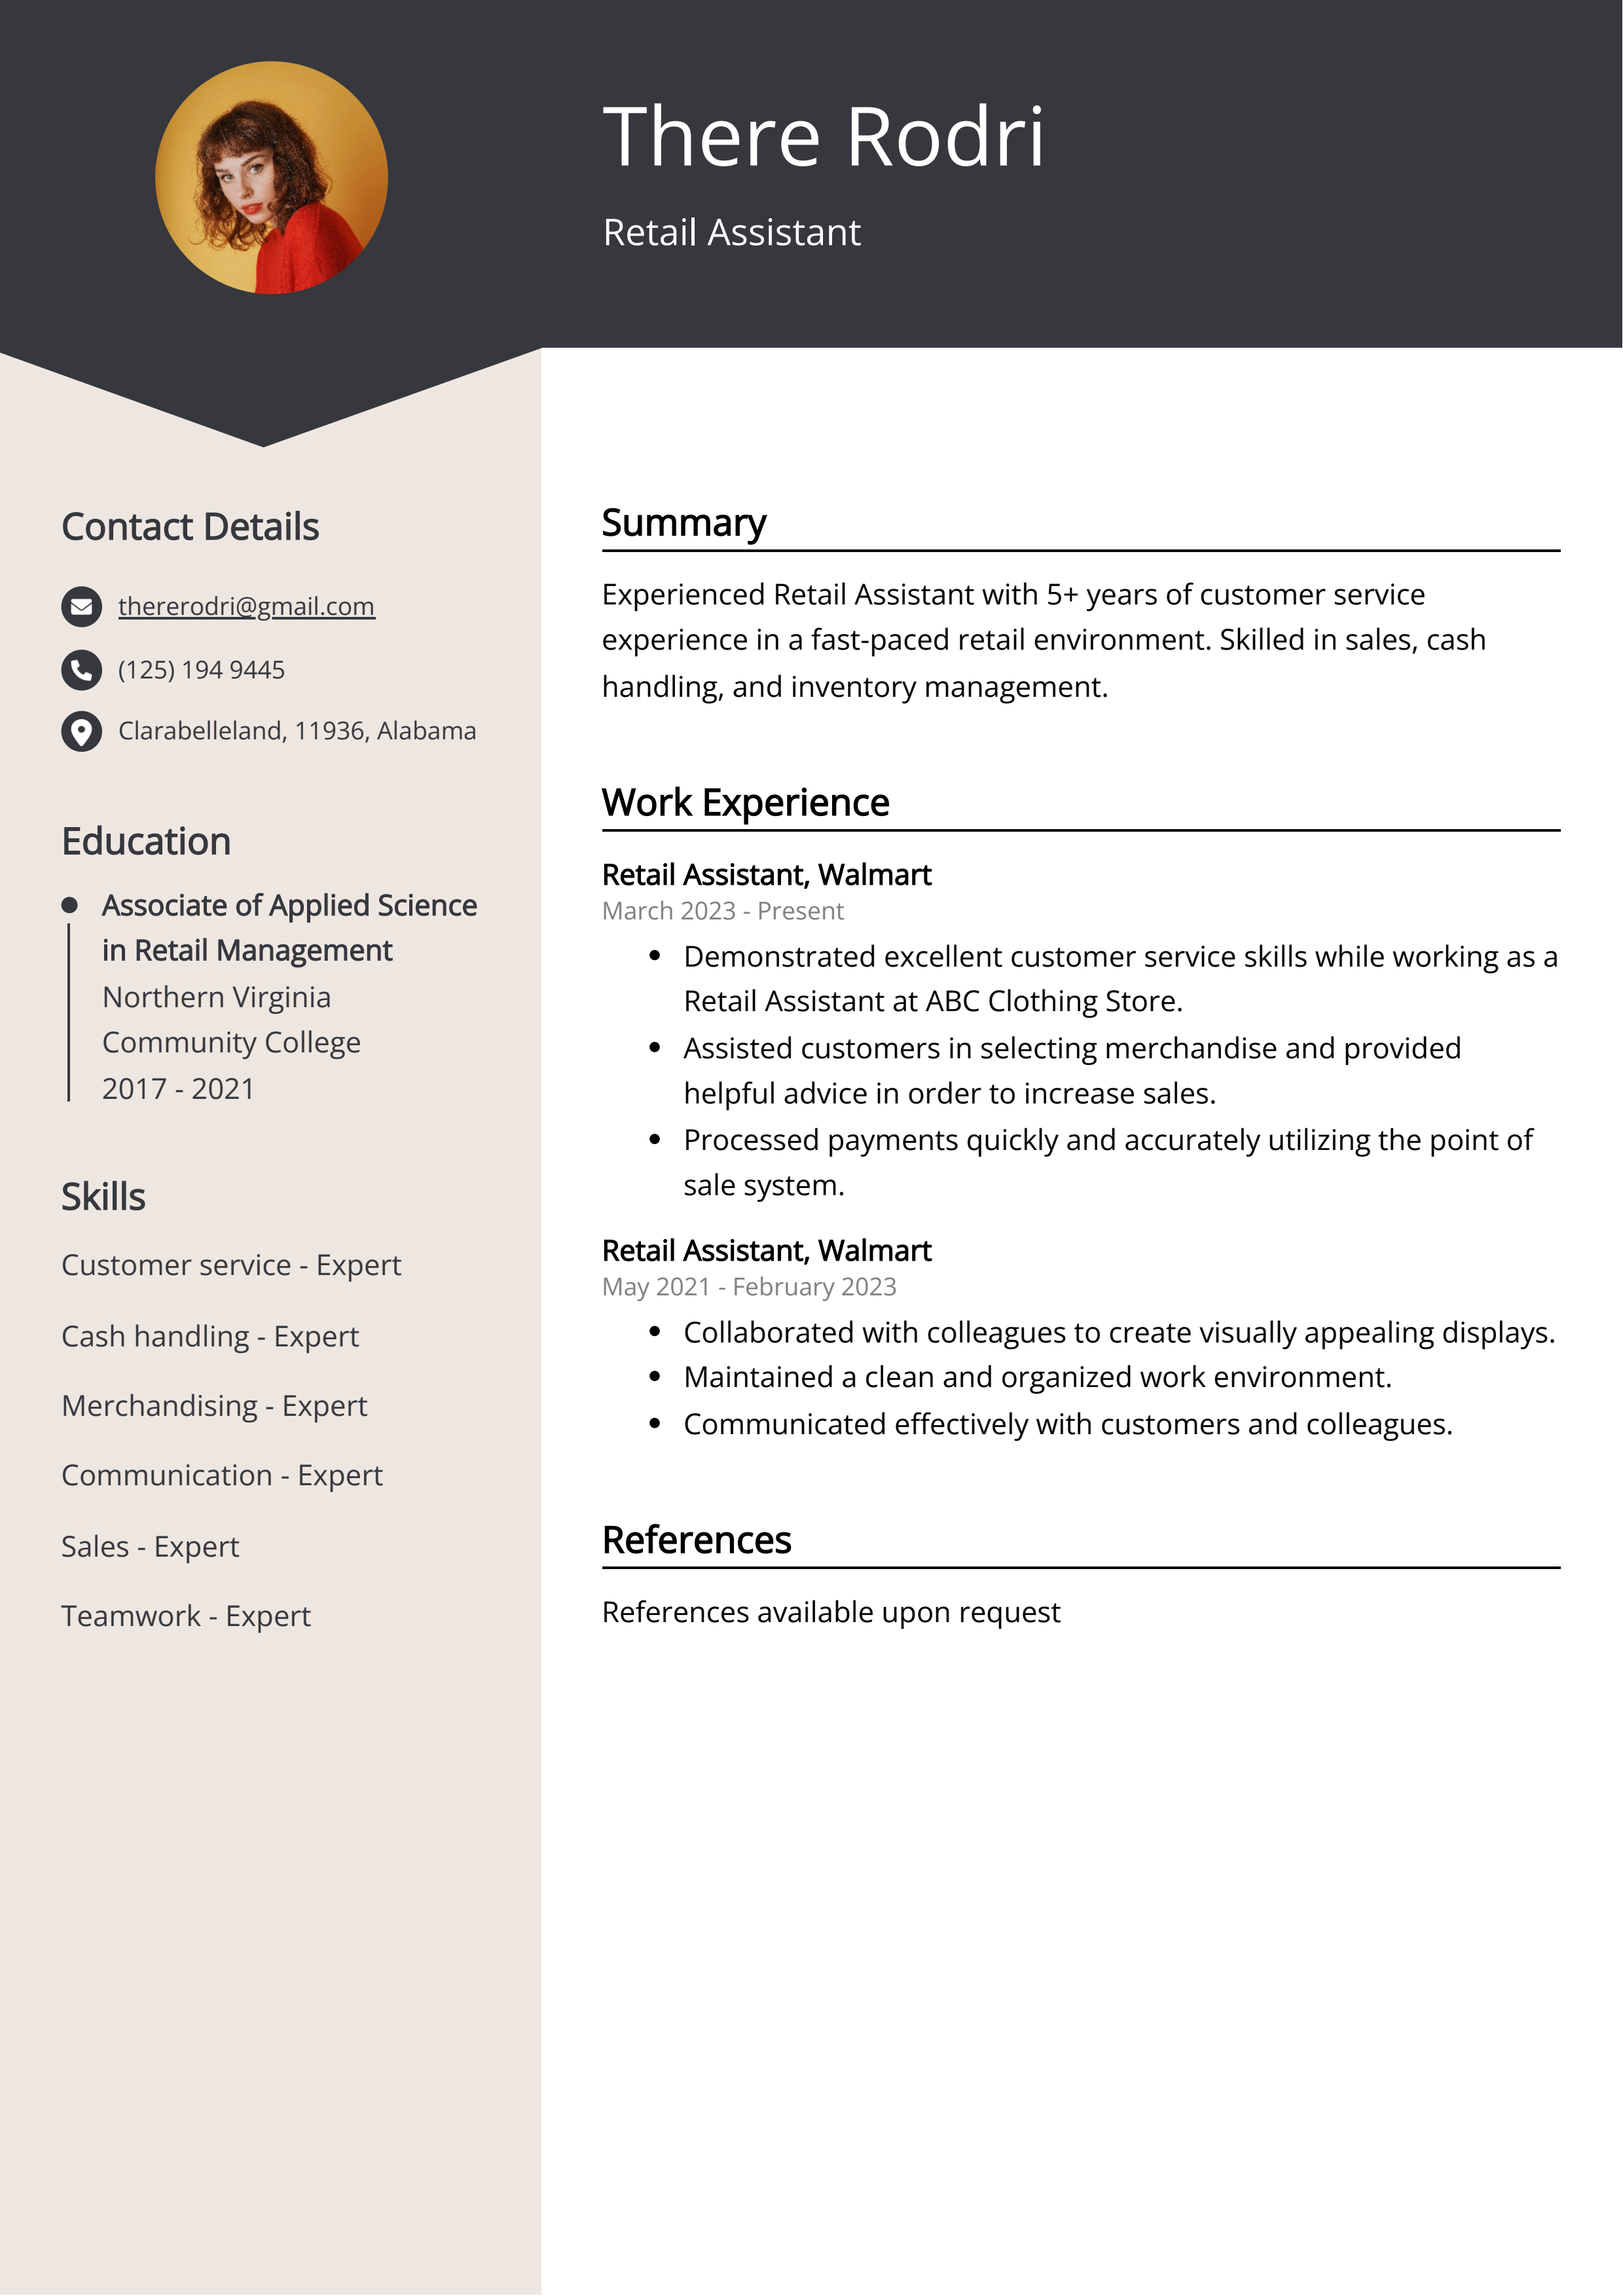 Retail Assistant Resume Example